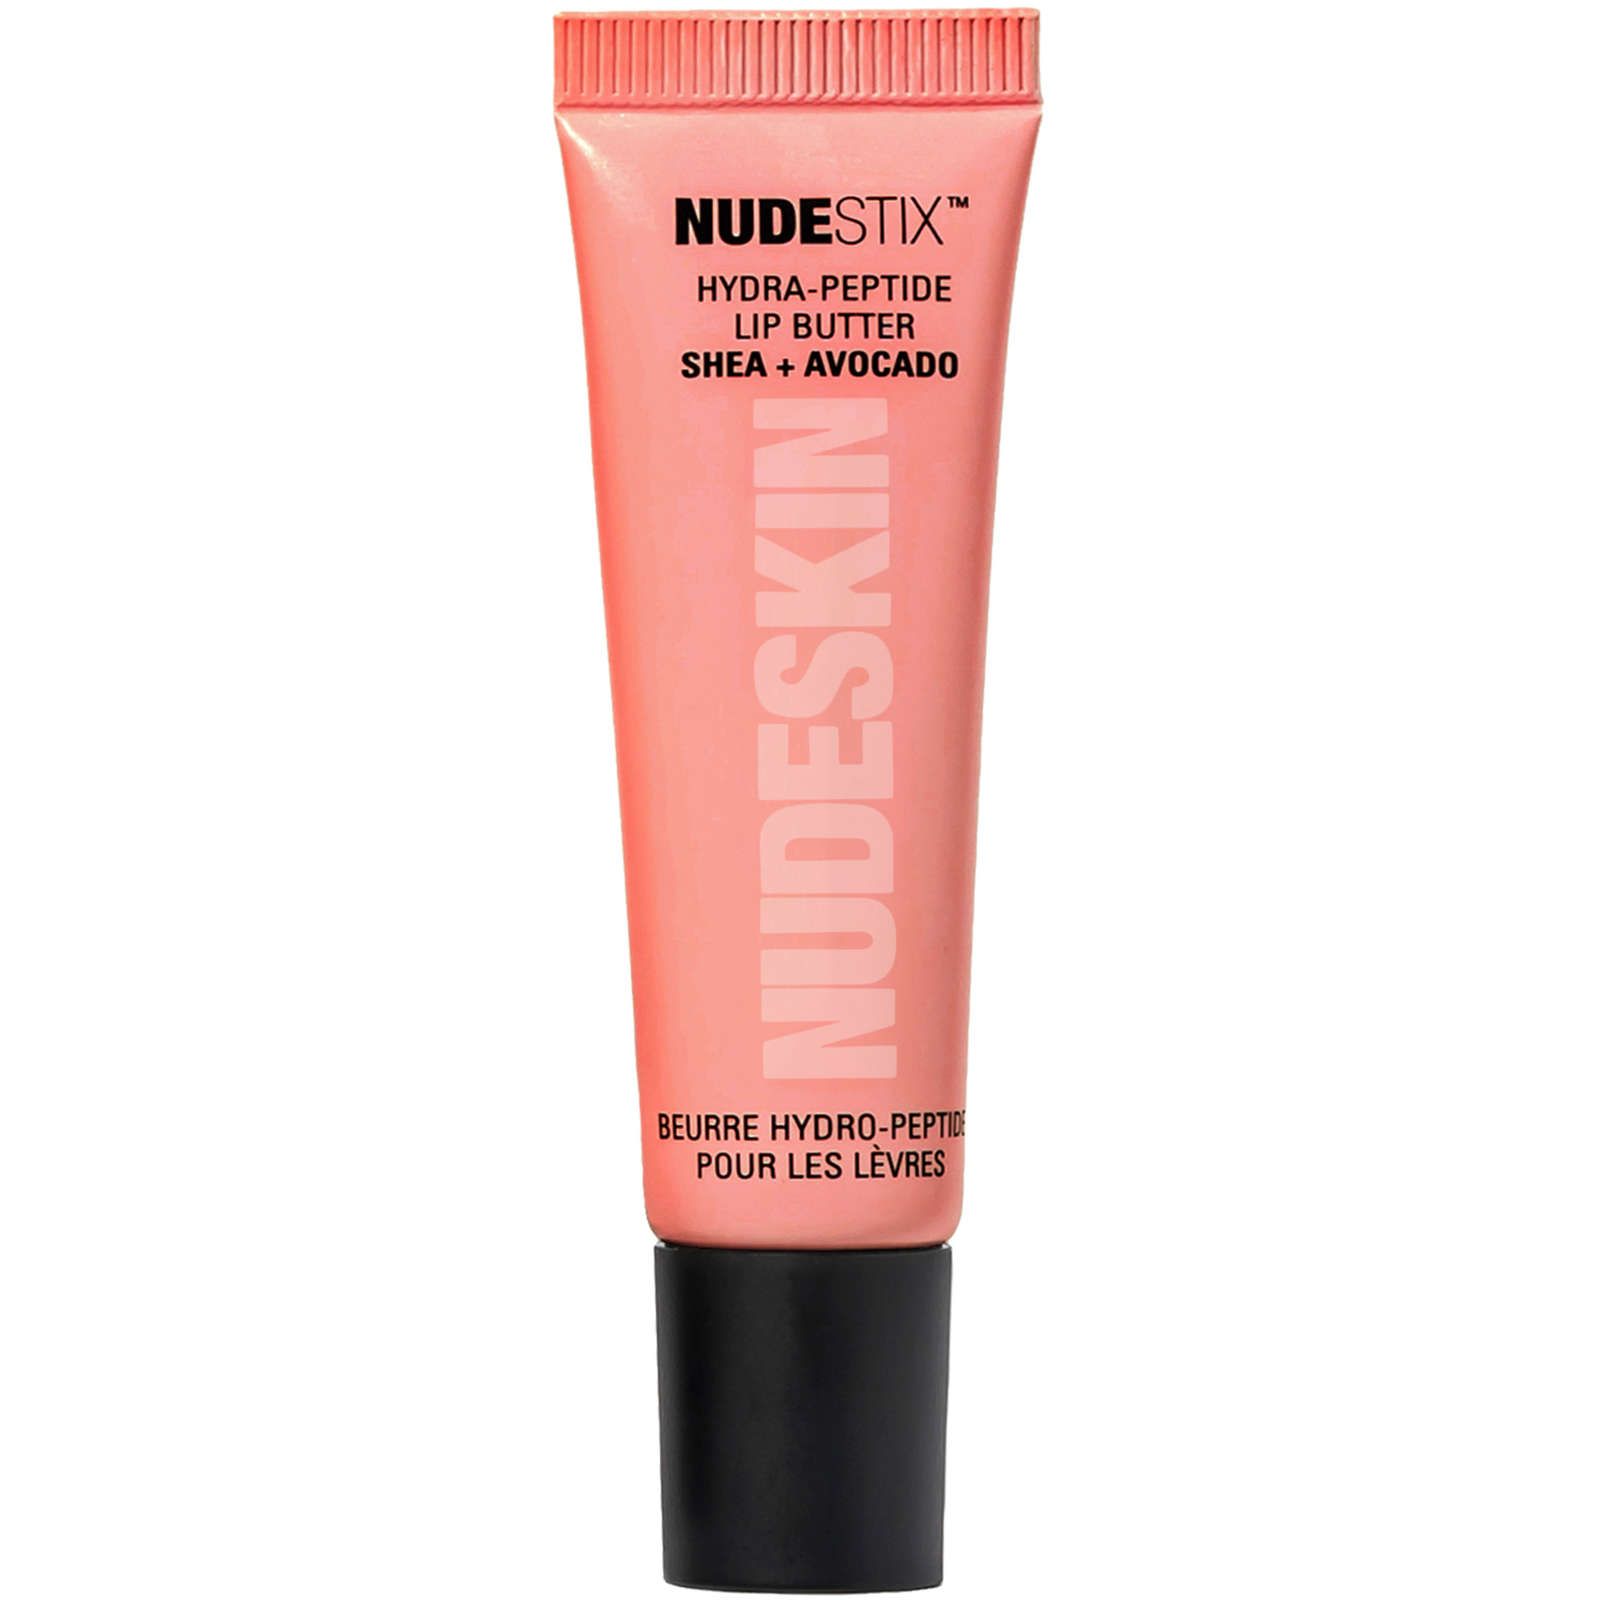 Hydra-Peptide Lip Butter - Candy Kiss | Shoppers Drug Mart - Beauty